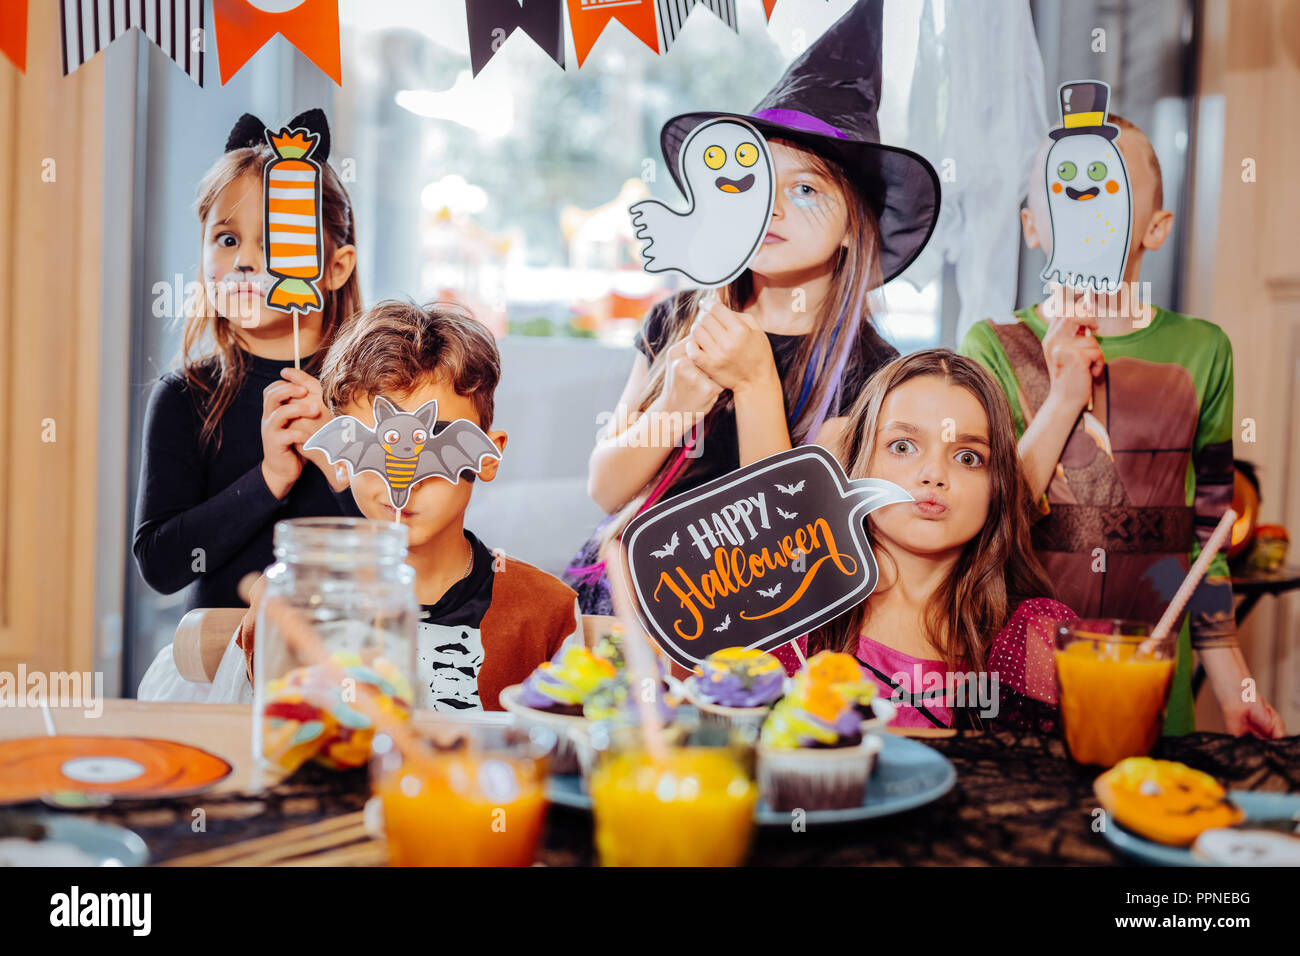 Boys and girls wearing costumes holding pictures and signs devoted to Halloween Stock Photo